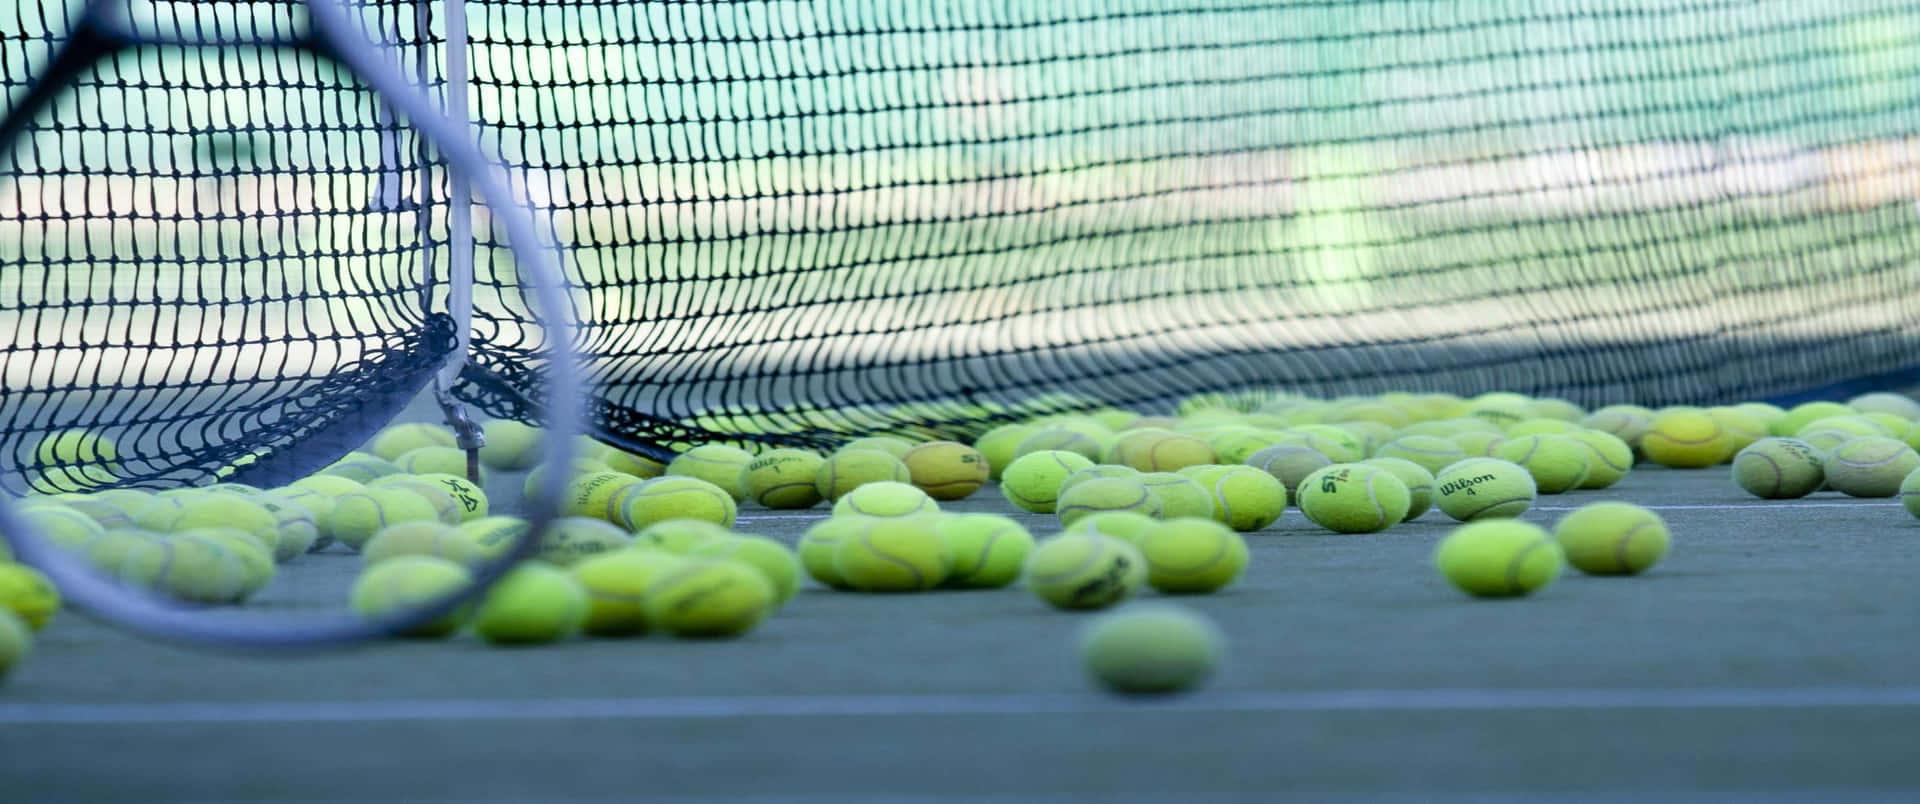 Challenge Yourself With 3440x1440p Tennis